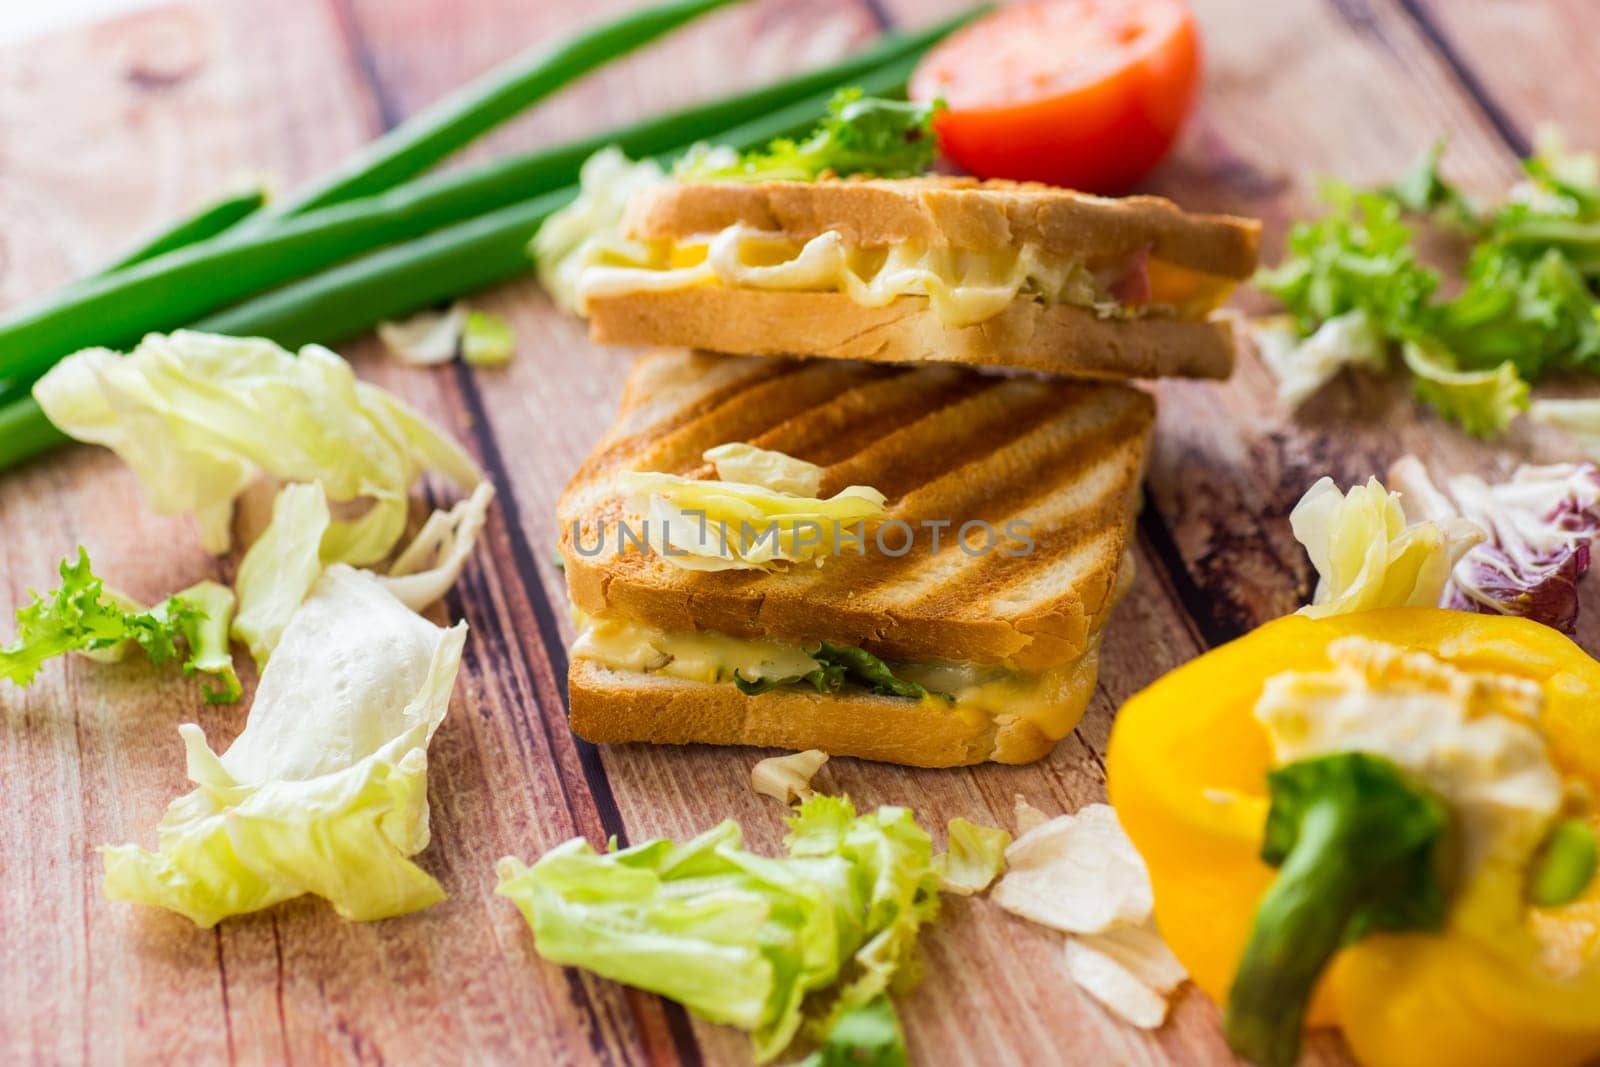 fried toasts with filling, salad leaves, tomatoes .